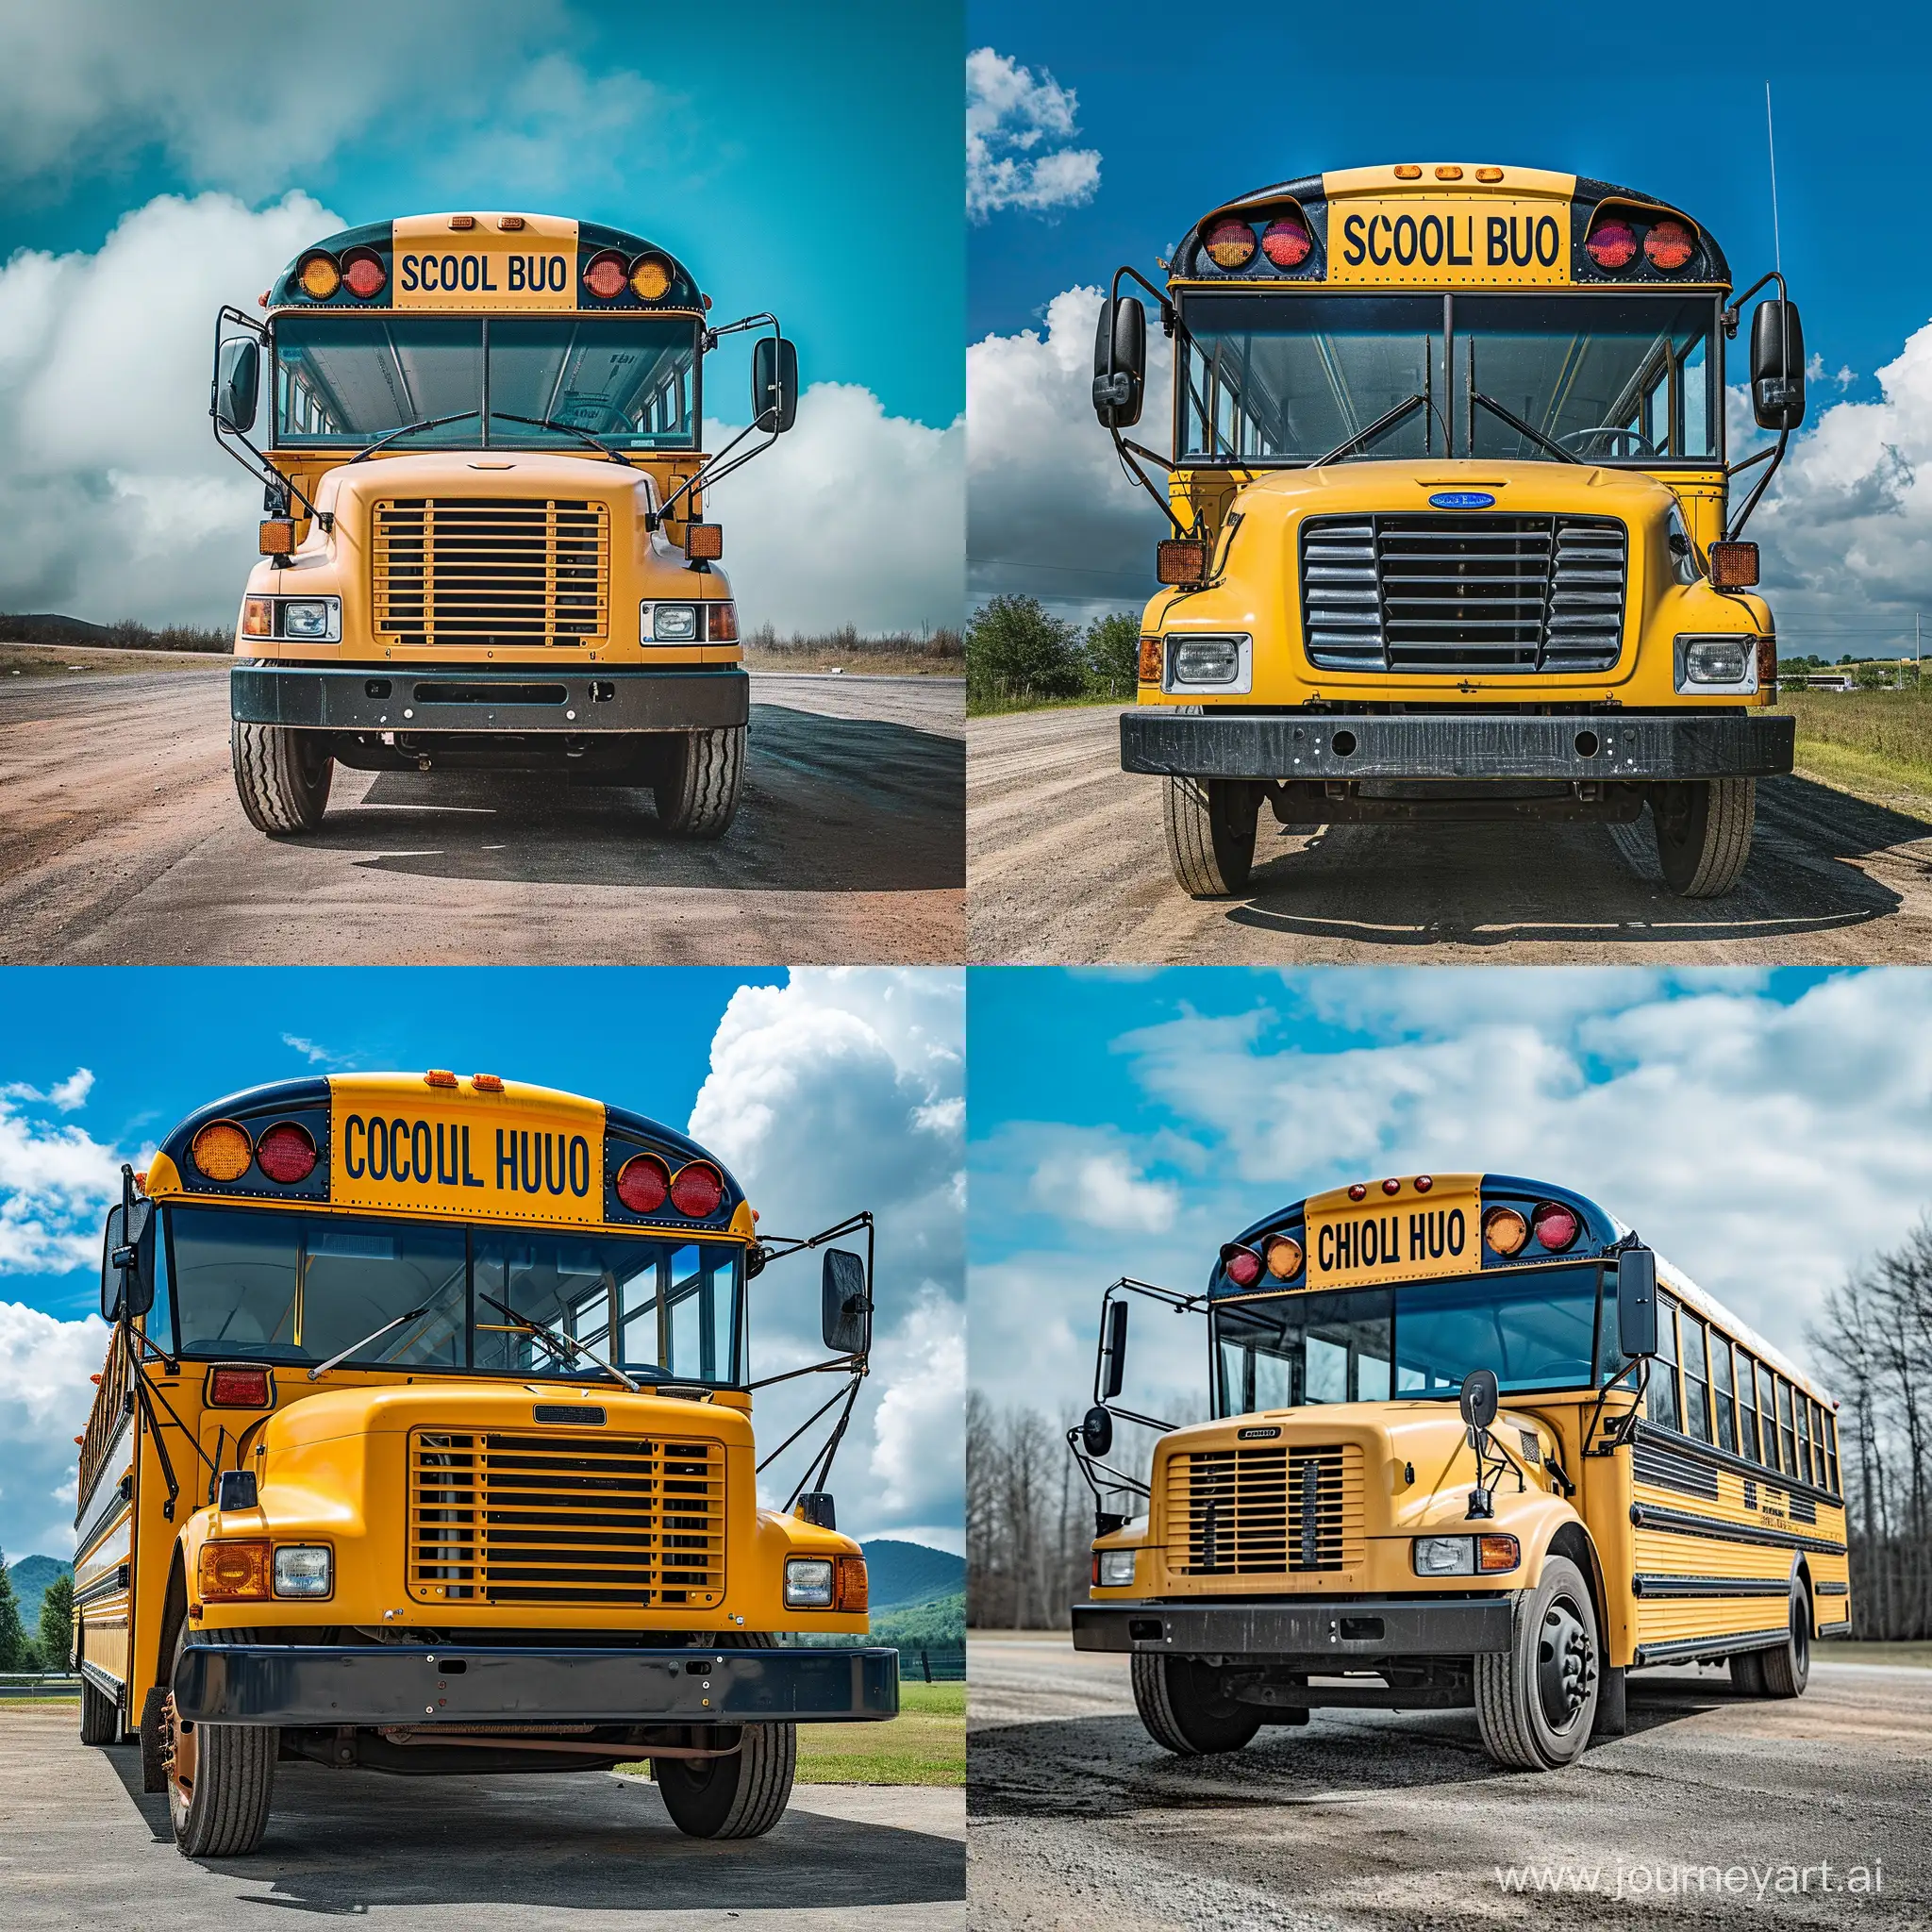 Bright-Yellow-American-School-Bus-Parked-Outdoors